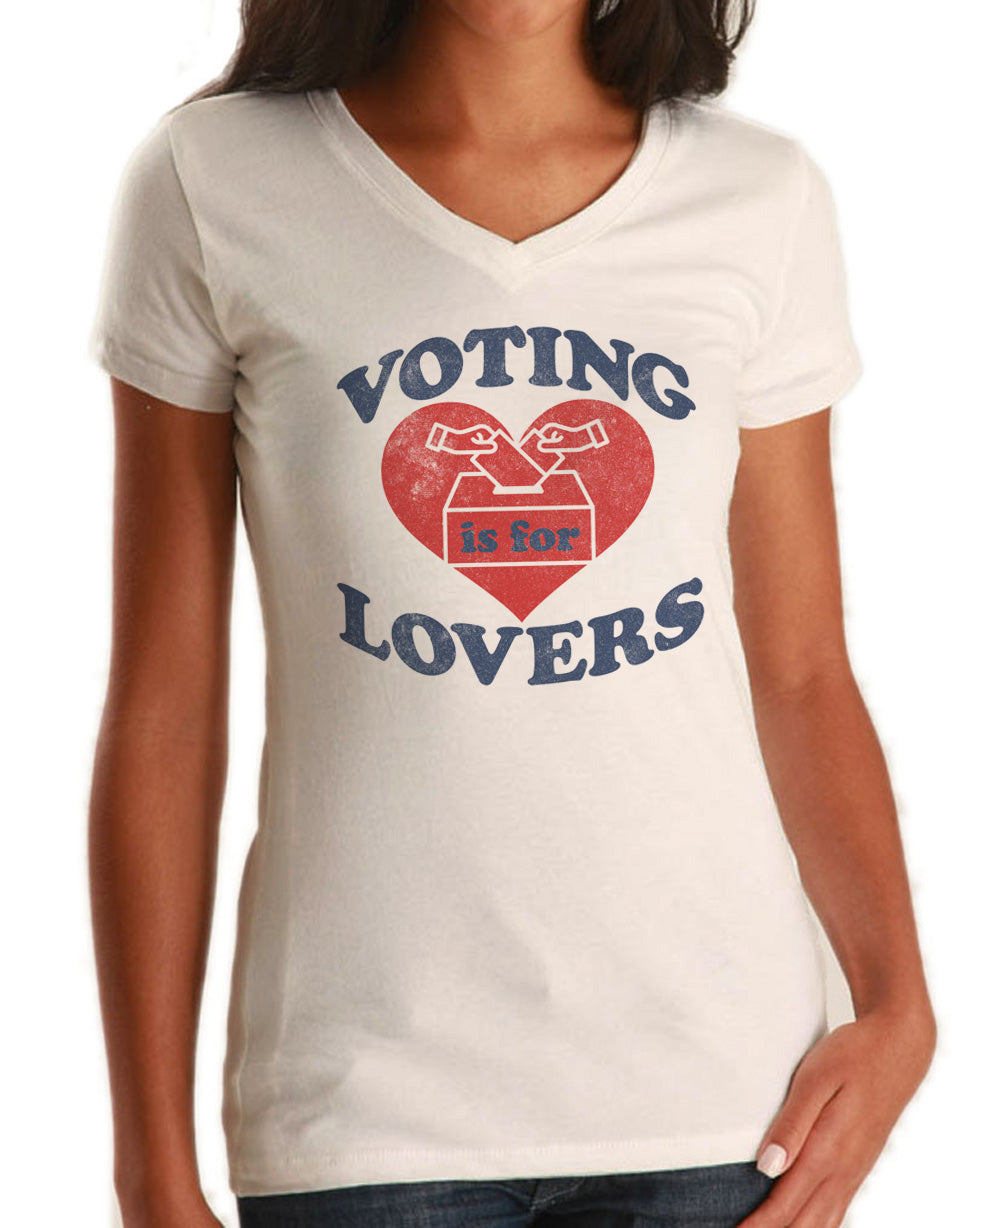 Women's Voting Is For Lovers Vneck T-Shirt